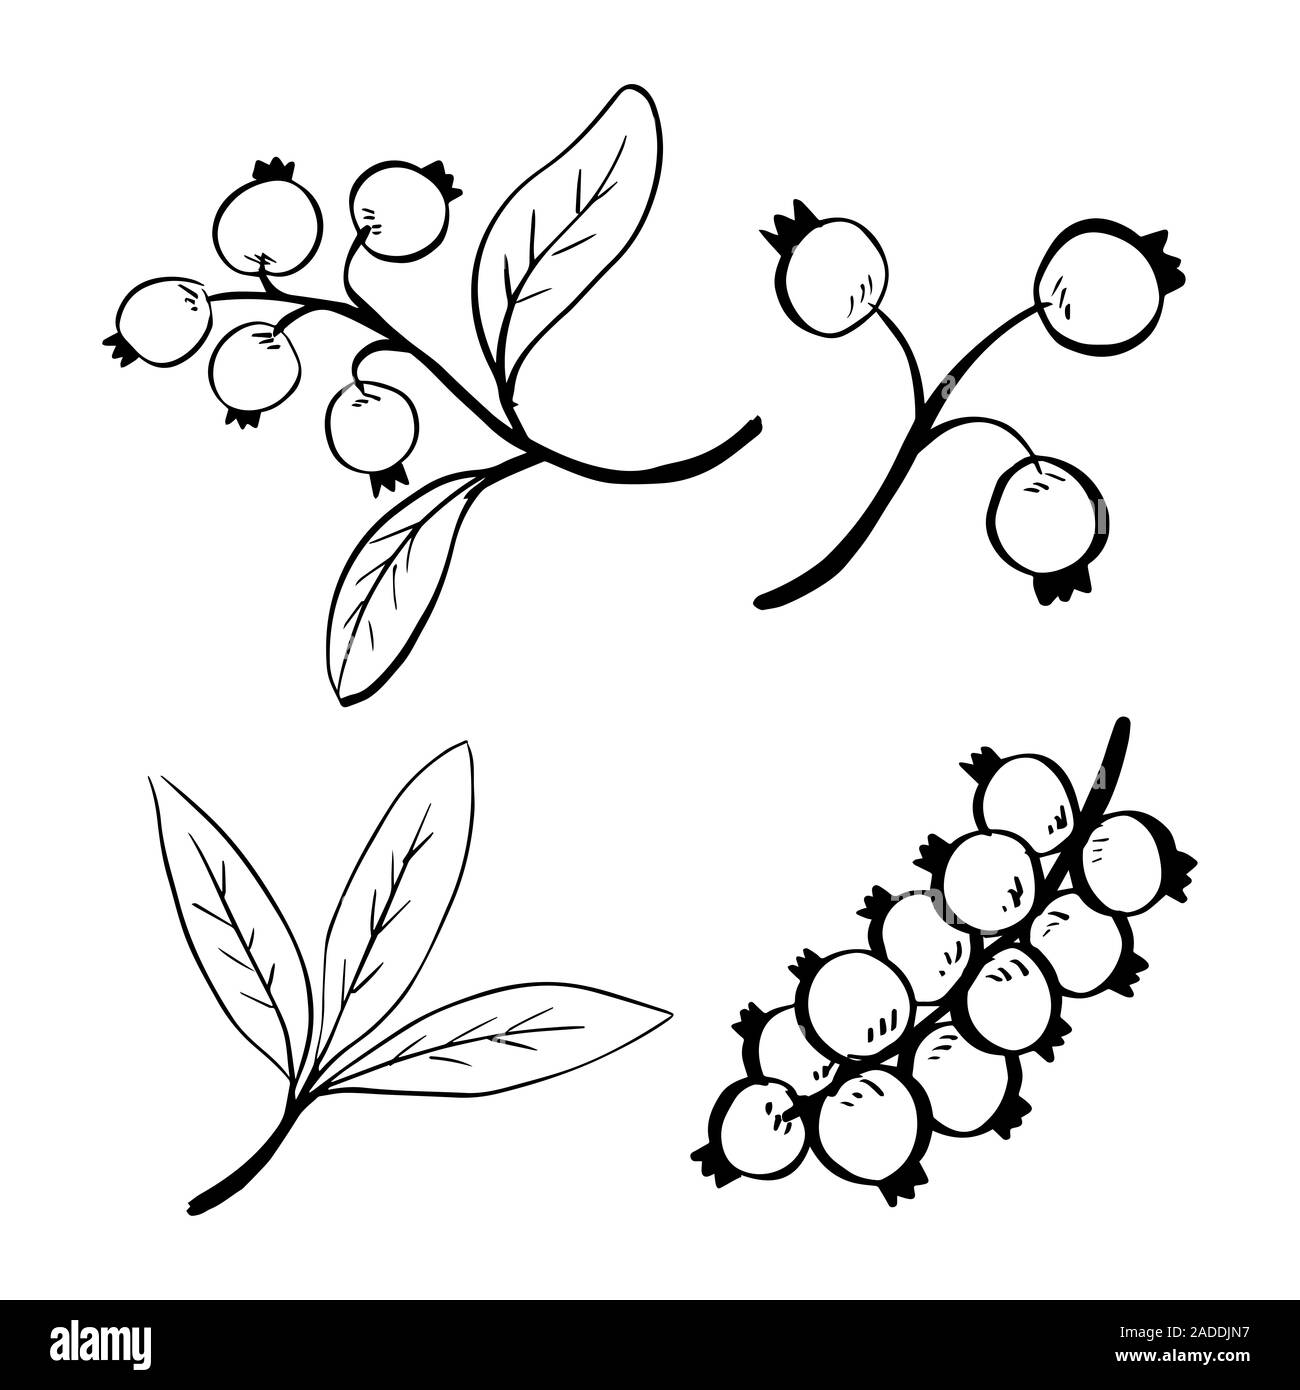 Doodle set of Berry and leaf isolated on white background for christmas elements - hand drawn vector illustration. Stock Photo